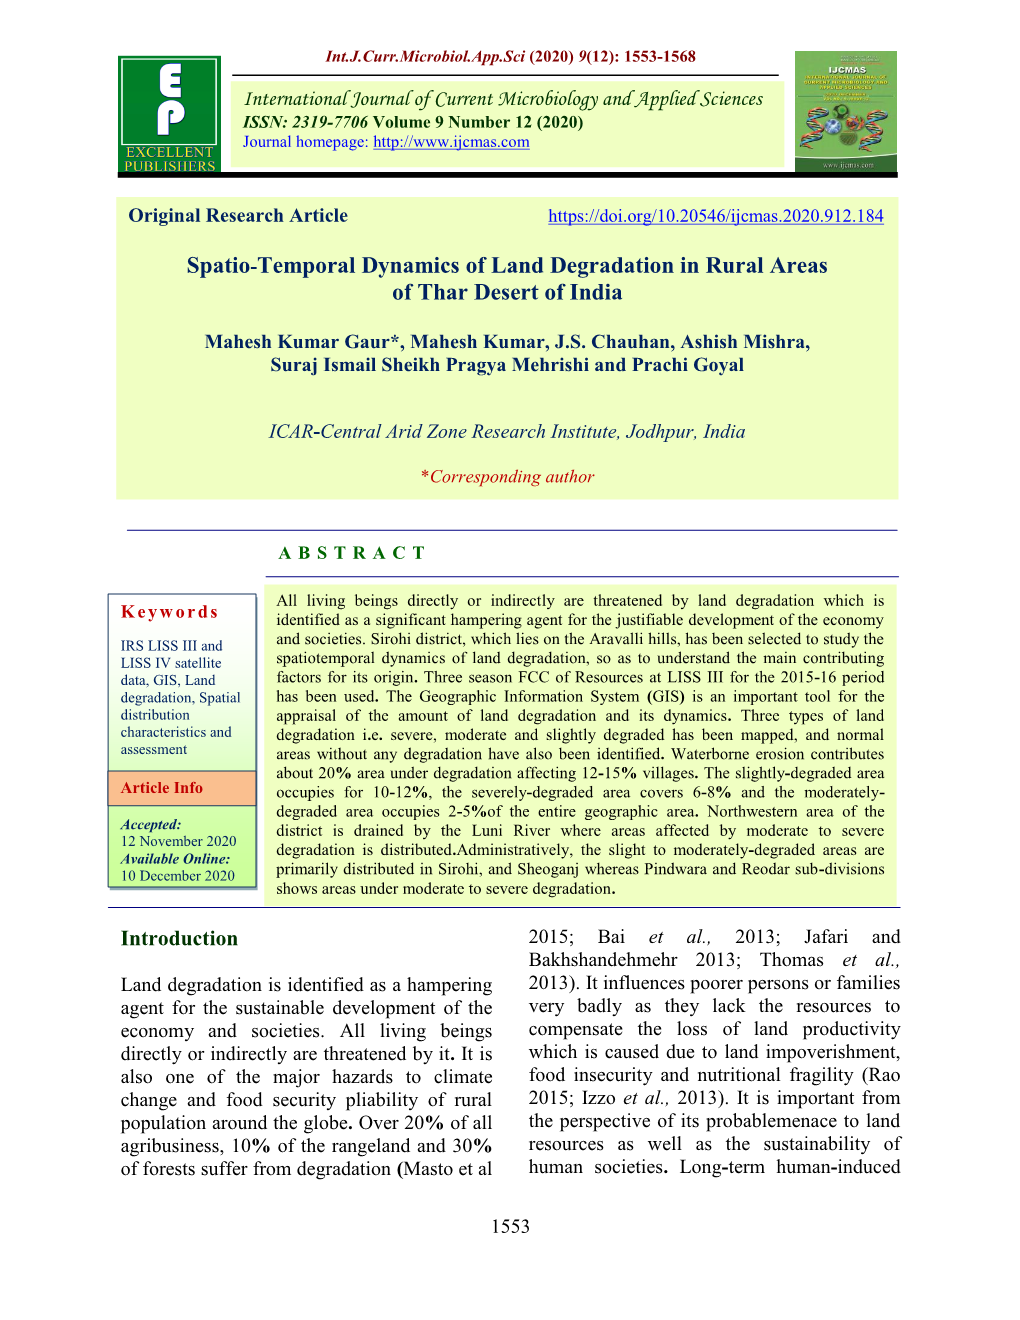 Spatio-Temporal Dynamics of Land Degradation in Rural Areas of Thar Desert of India